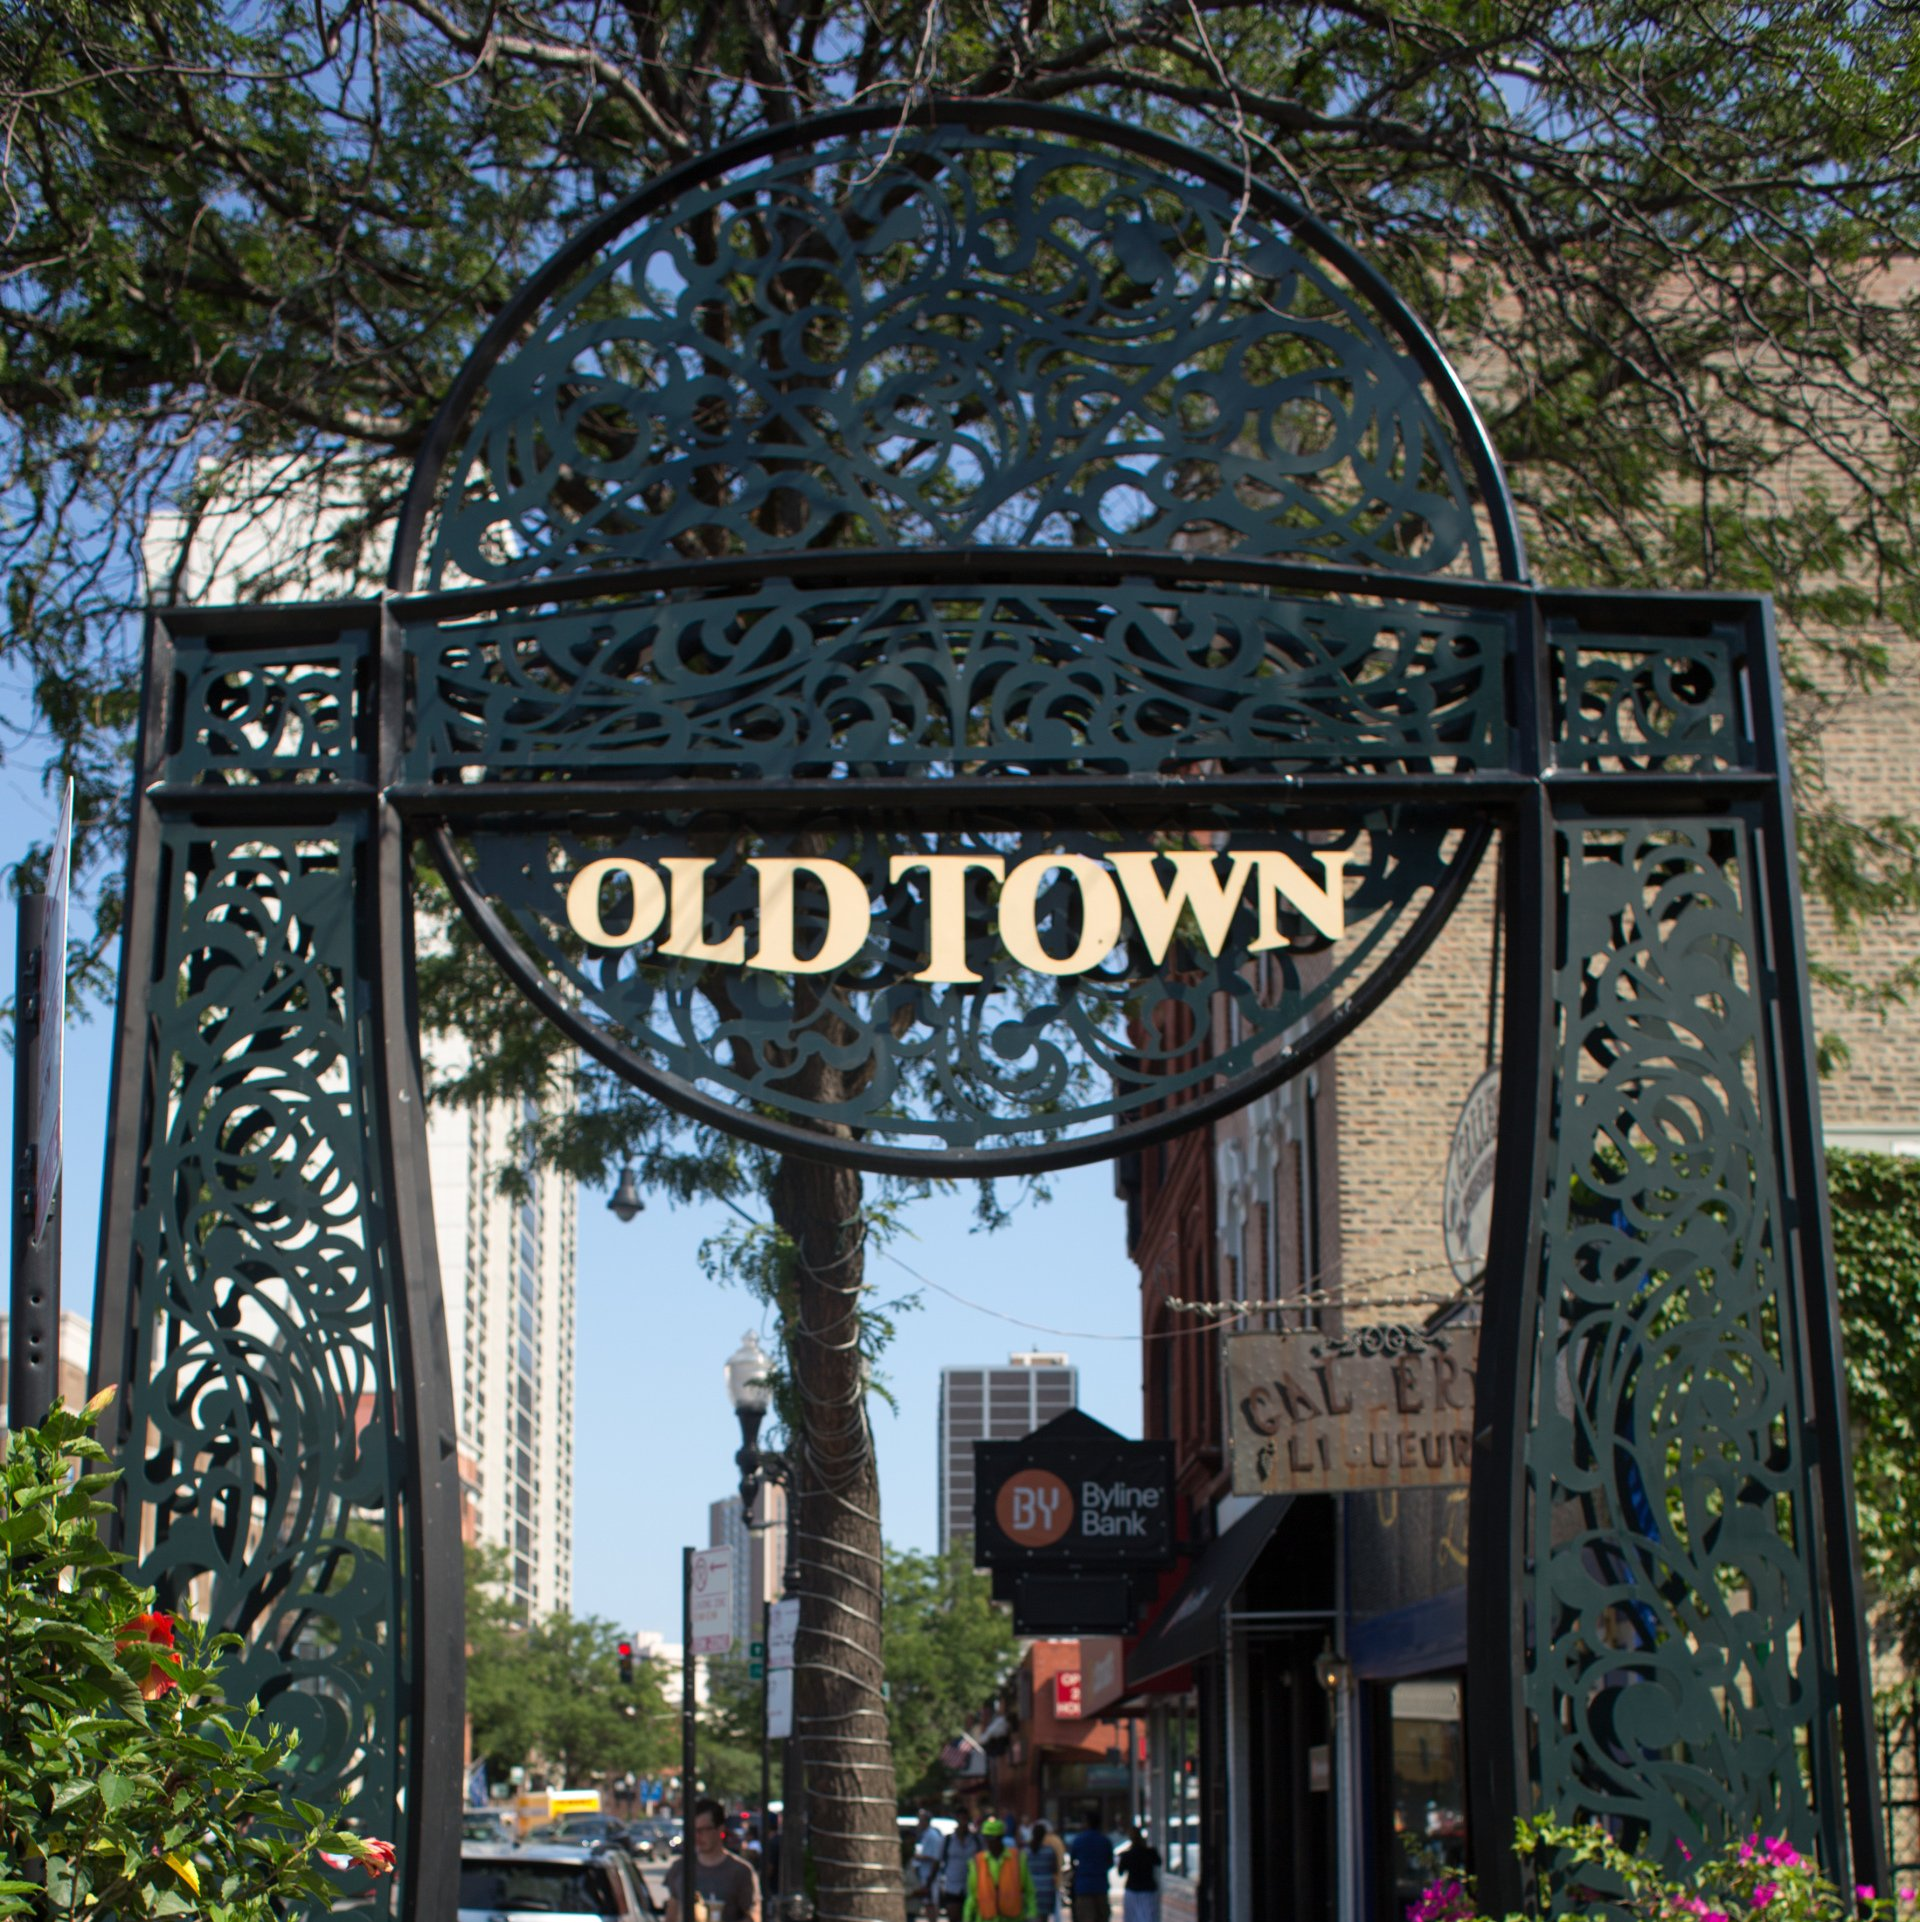 Photograph of the Old Town neighborhood sign